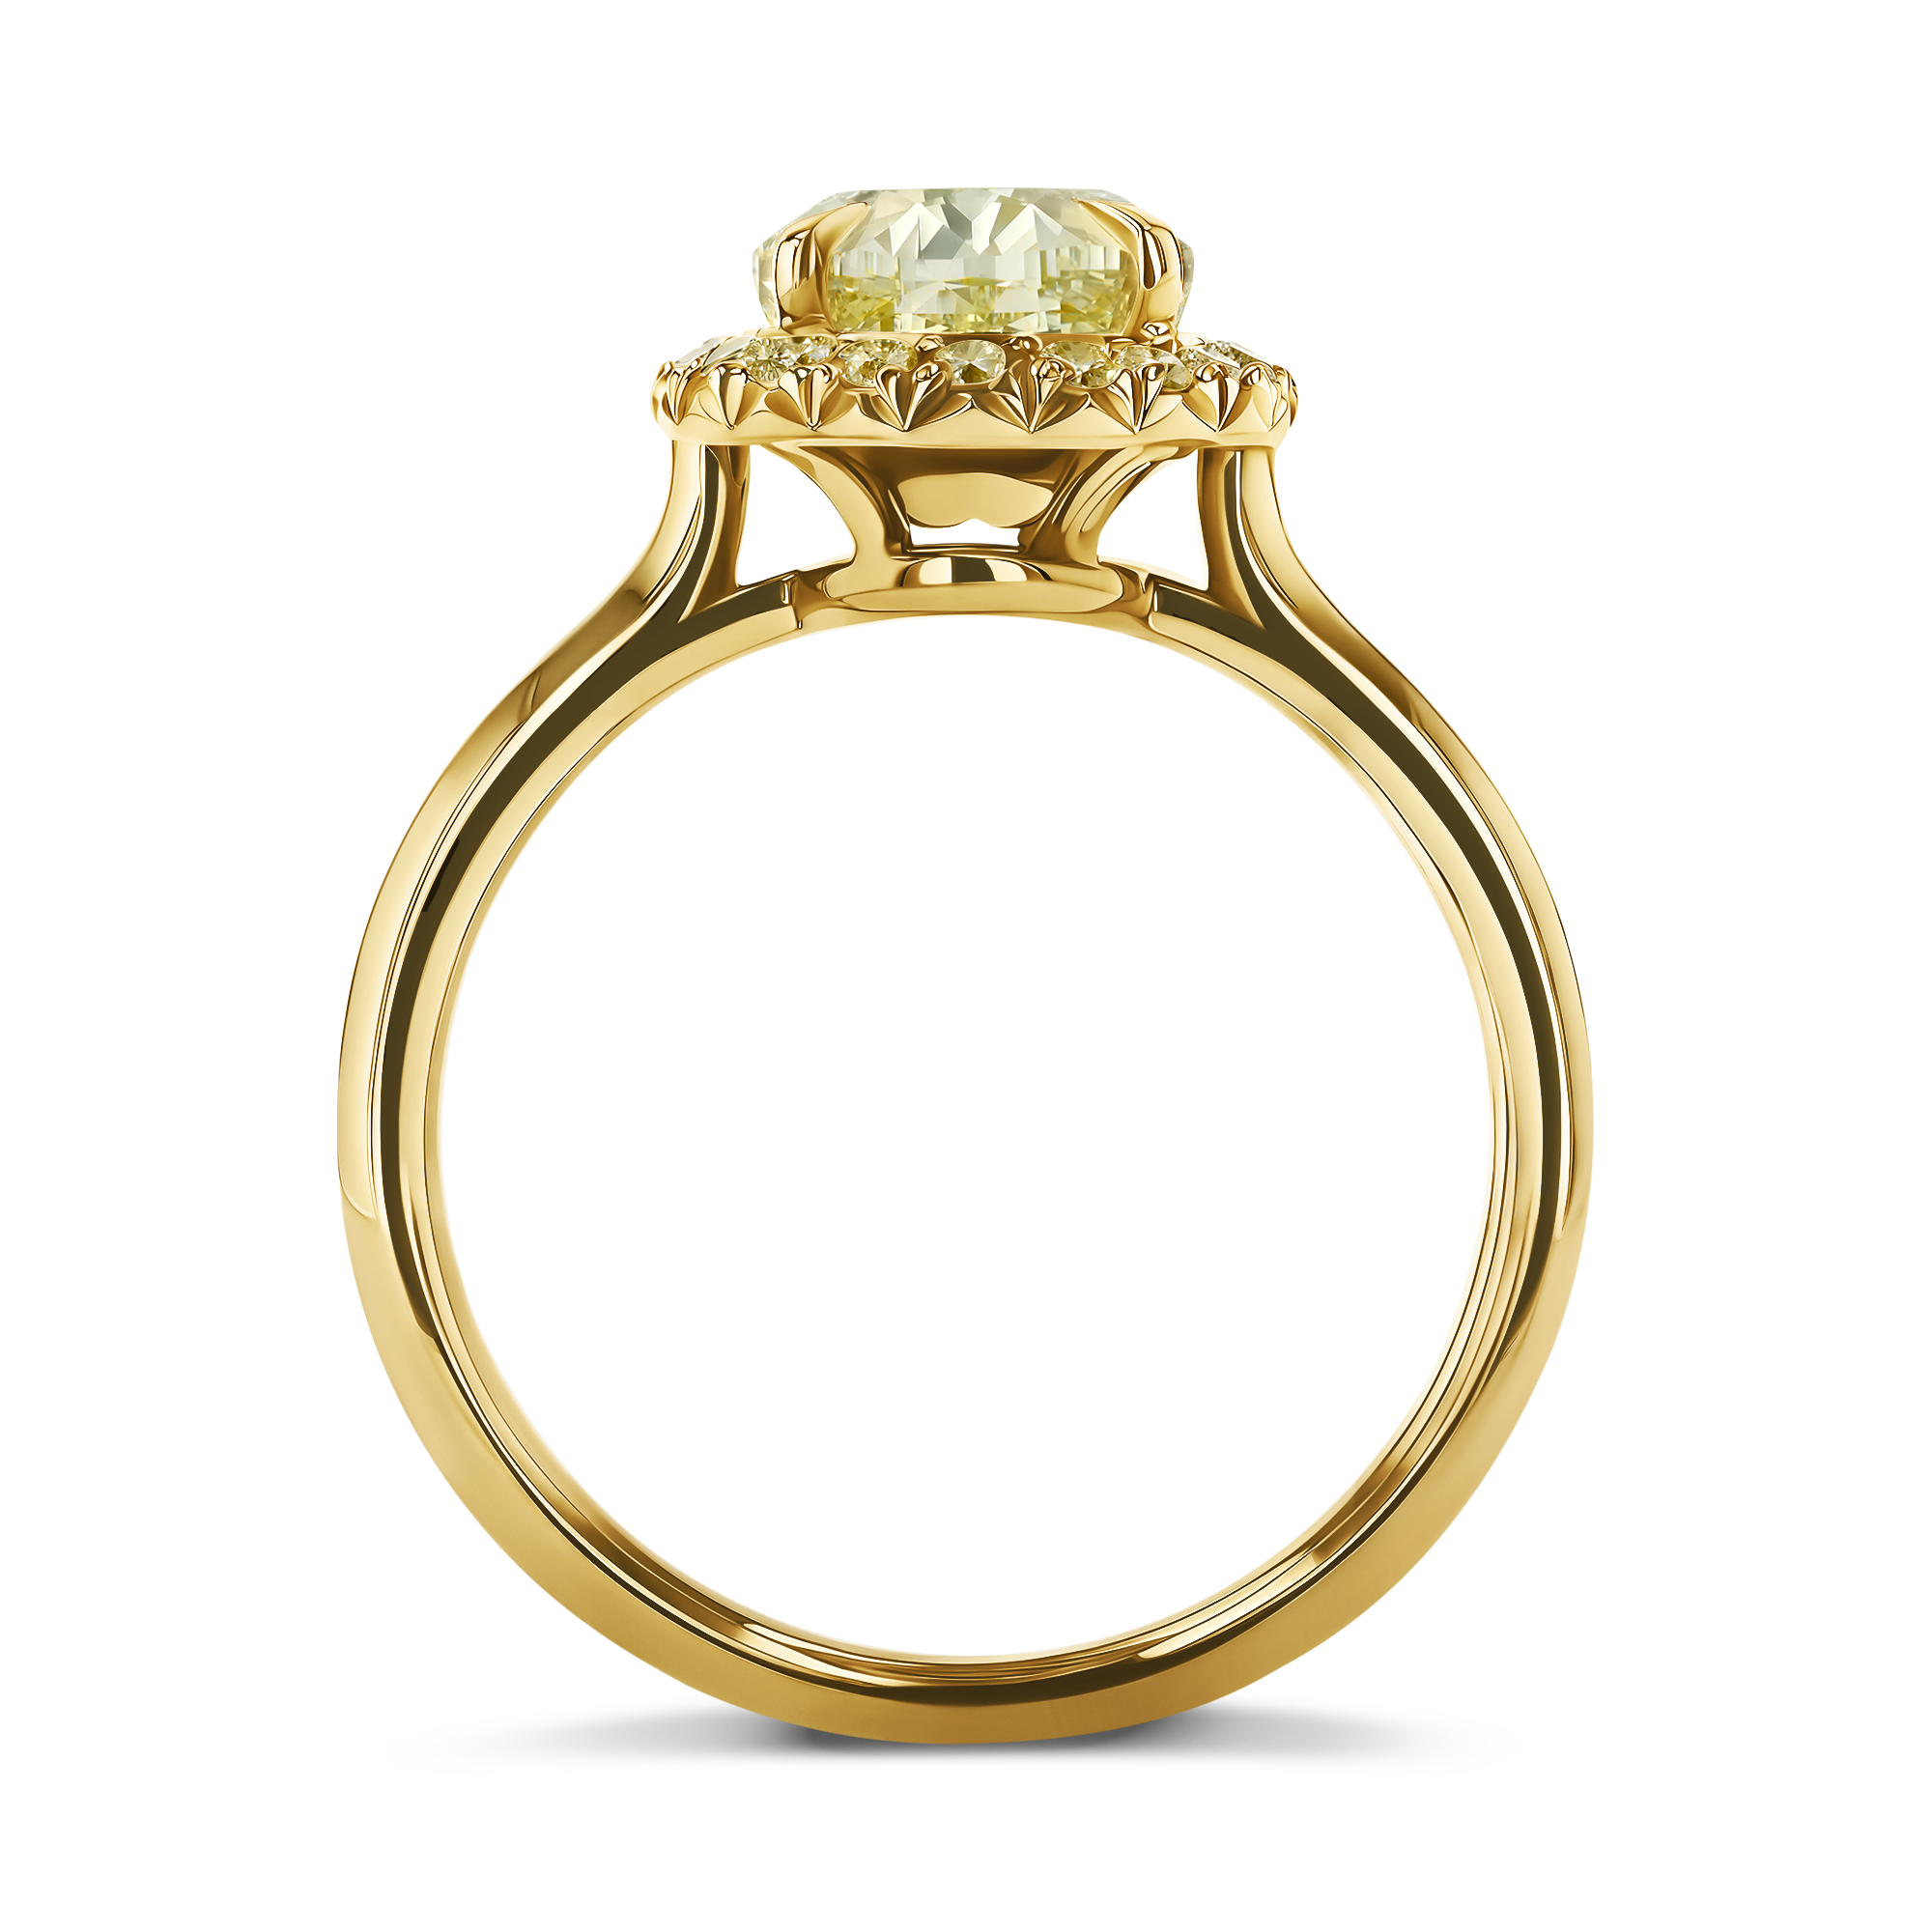 Celestial 3.01ct Fancy Yellow Diamond Cluster Ring Oval Cut, Claw Set_3